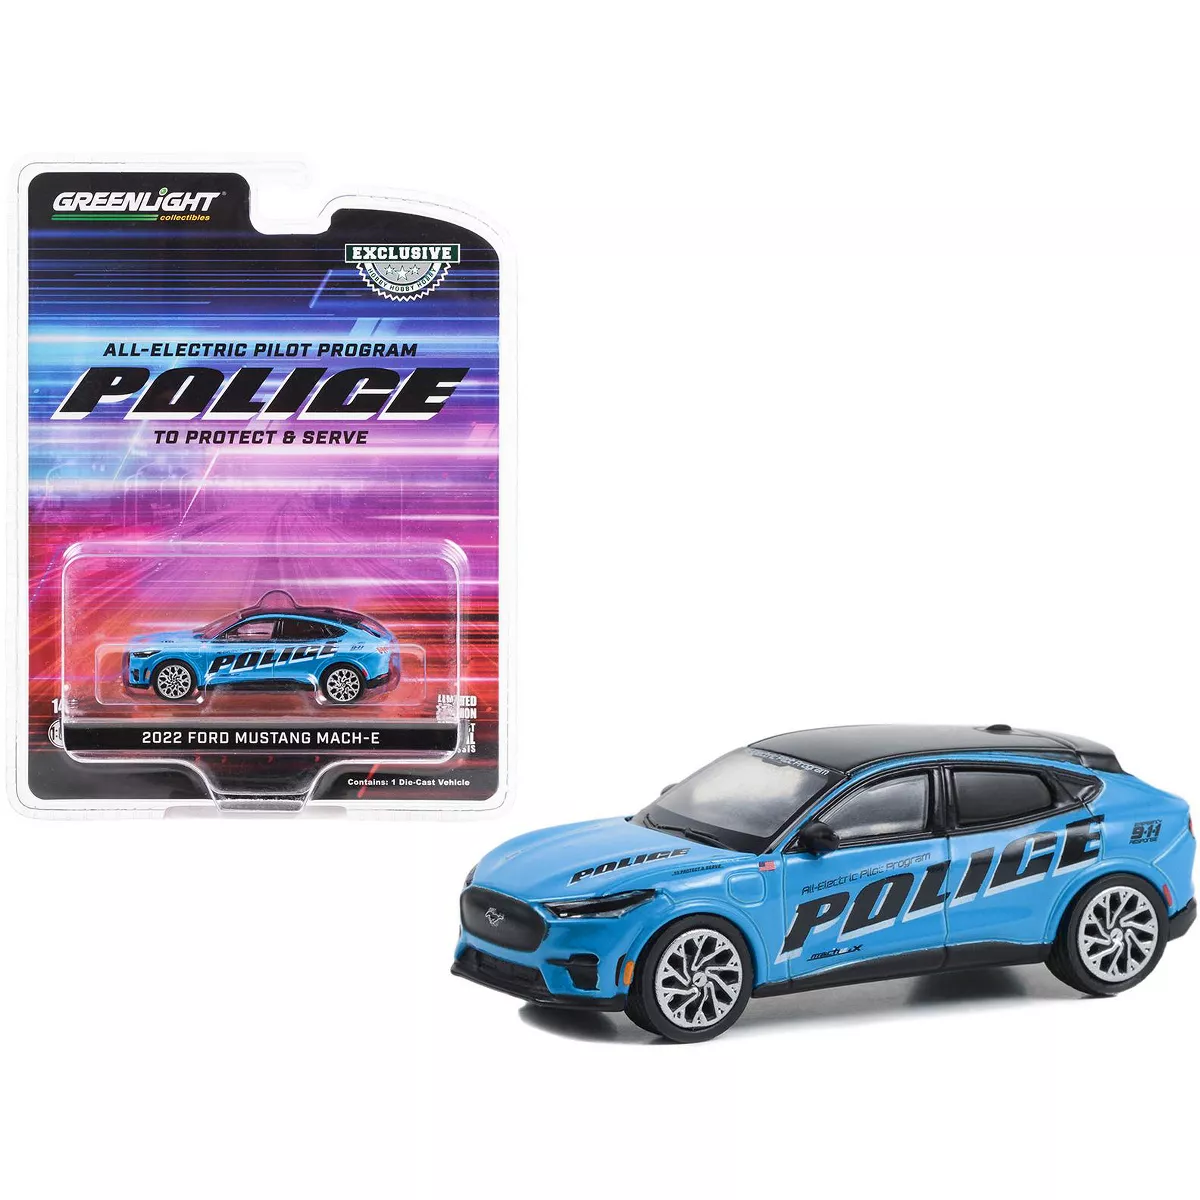 Greenlight 1/64 2022 Ford Mustang Mach-E Police GT Performance Edition - All-Electric Pilot Program Pilot Vehicle 30429